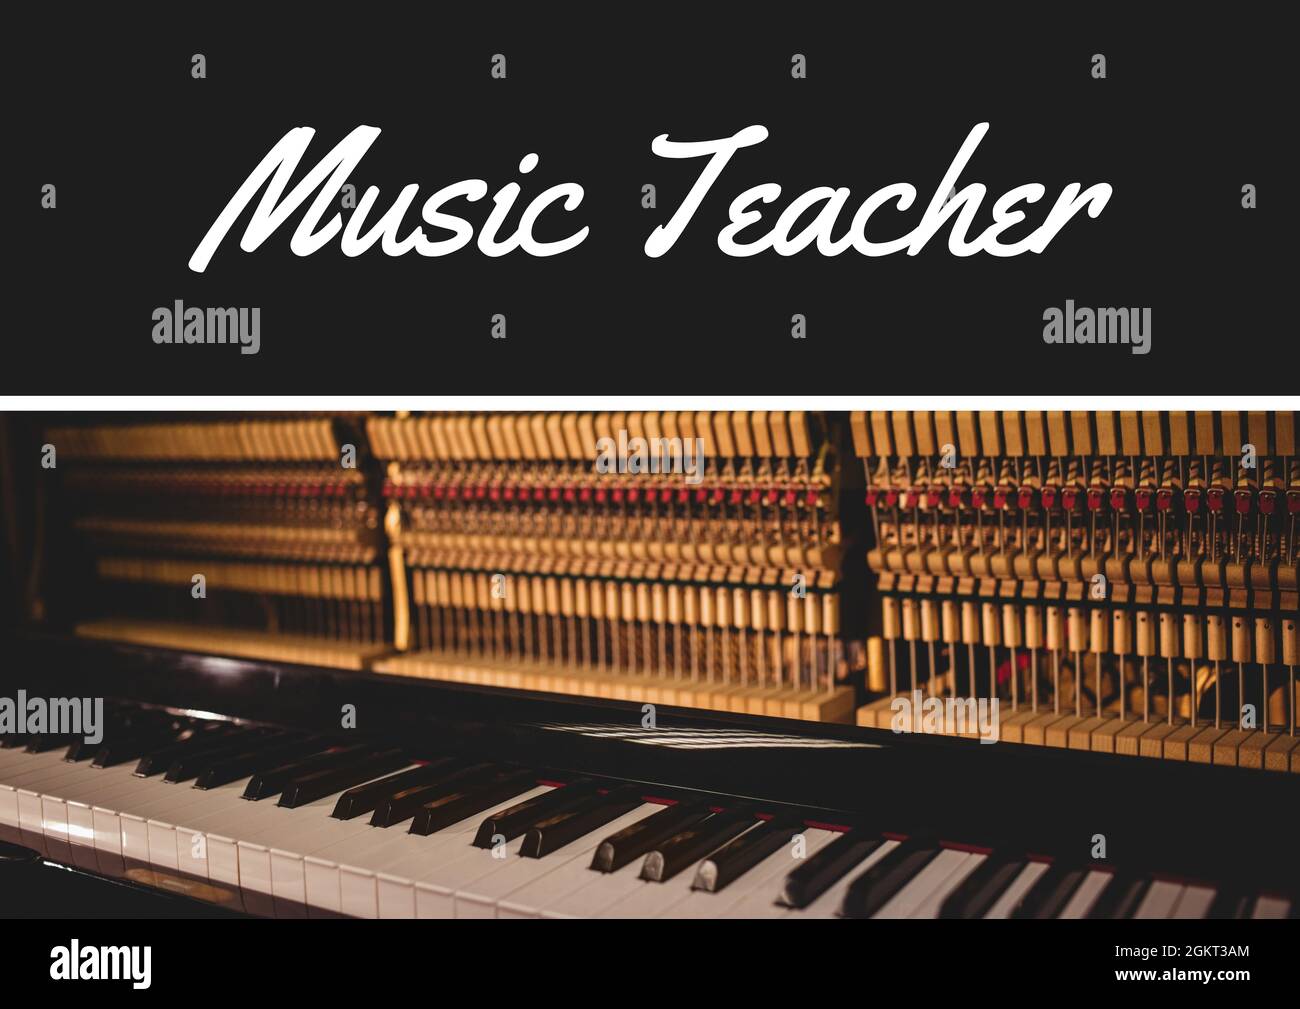 Music teacher text banner over piano against black background Stock Photo